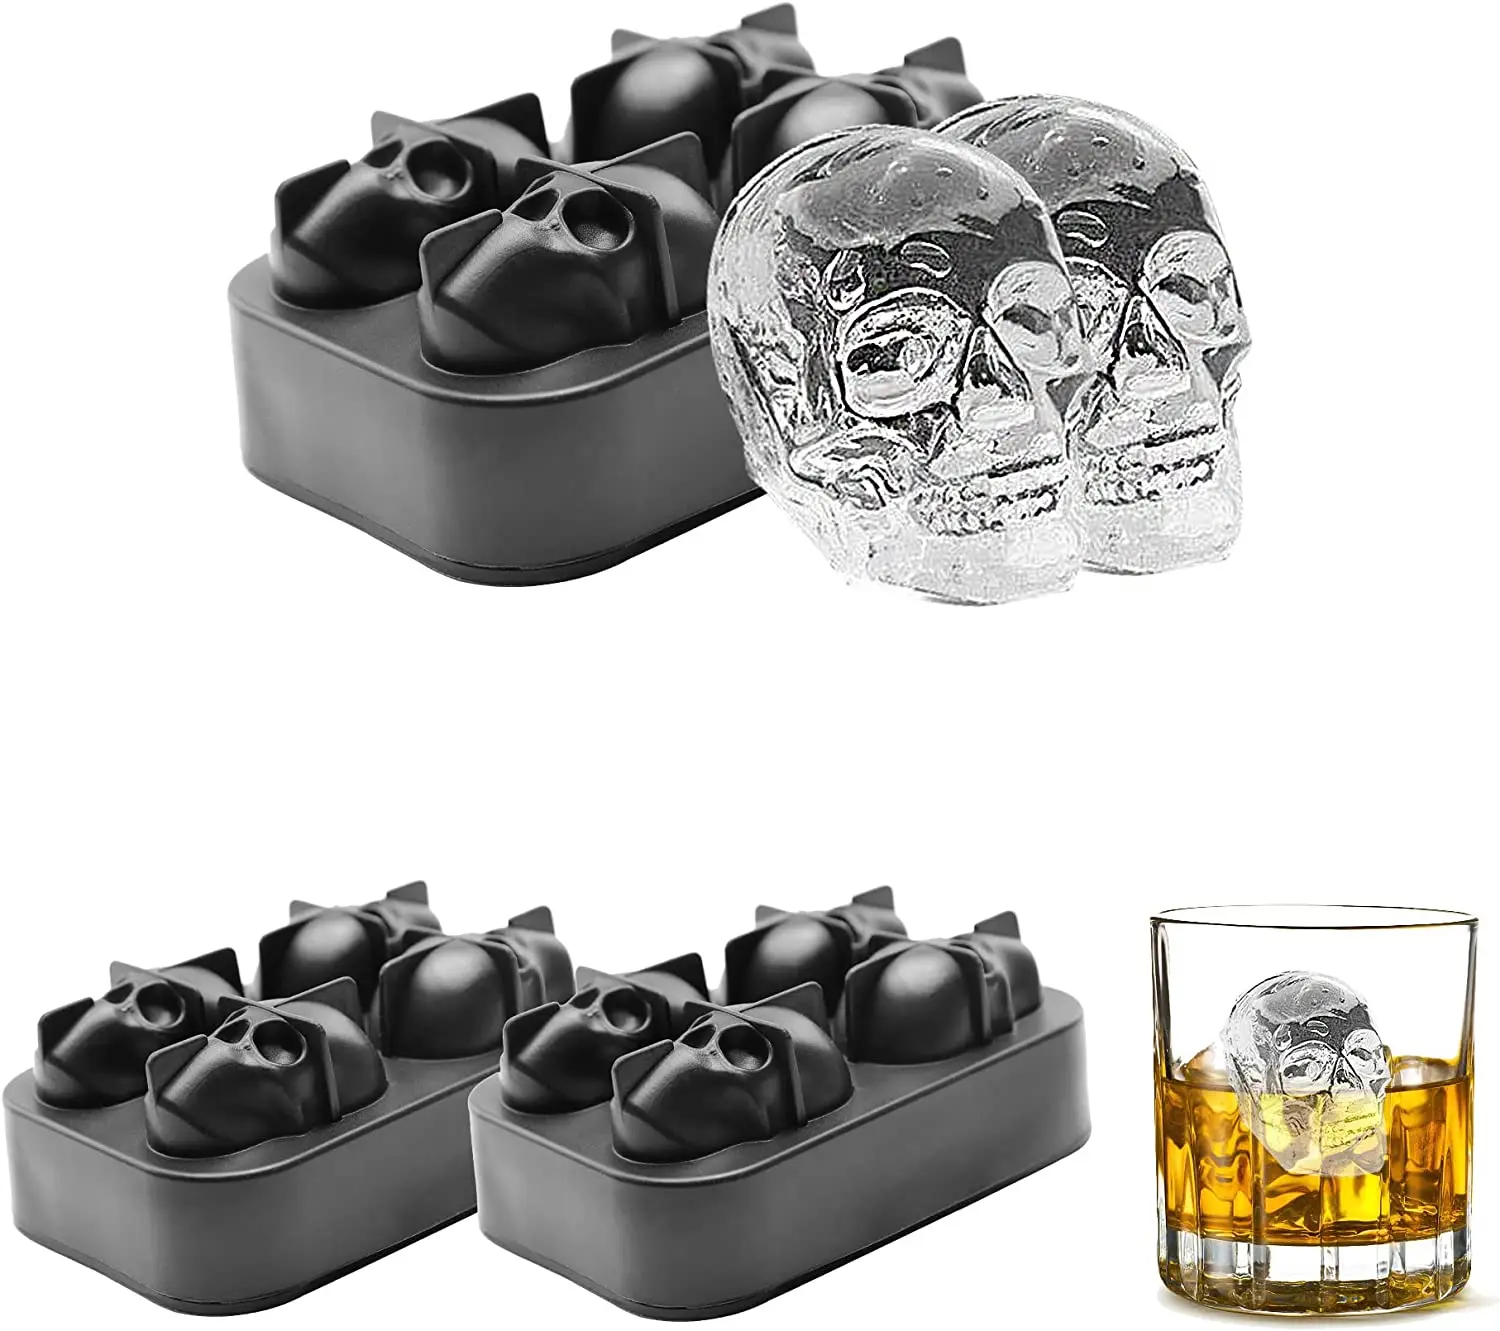 Ice Cube Trays with Lids BPA Free, 4 Pack Easy Release Silicone Ice Cube  Trays for Freezer 84 Sphere Ice Tray with Stackable No Spill Lids,  Dishwasher